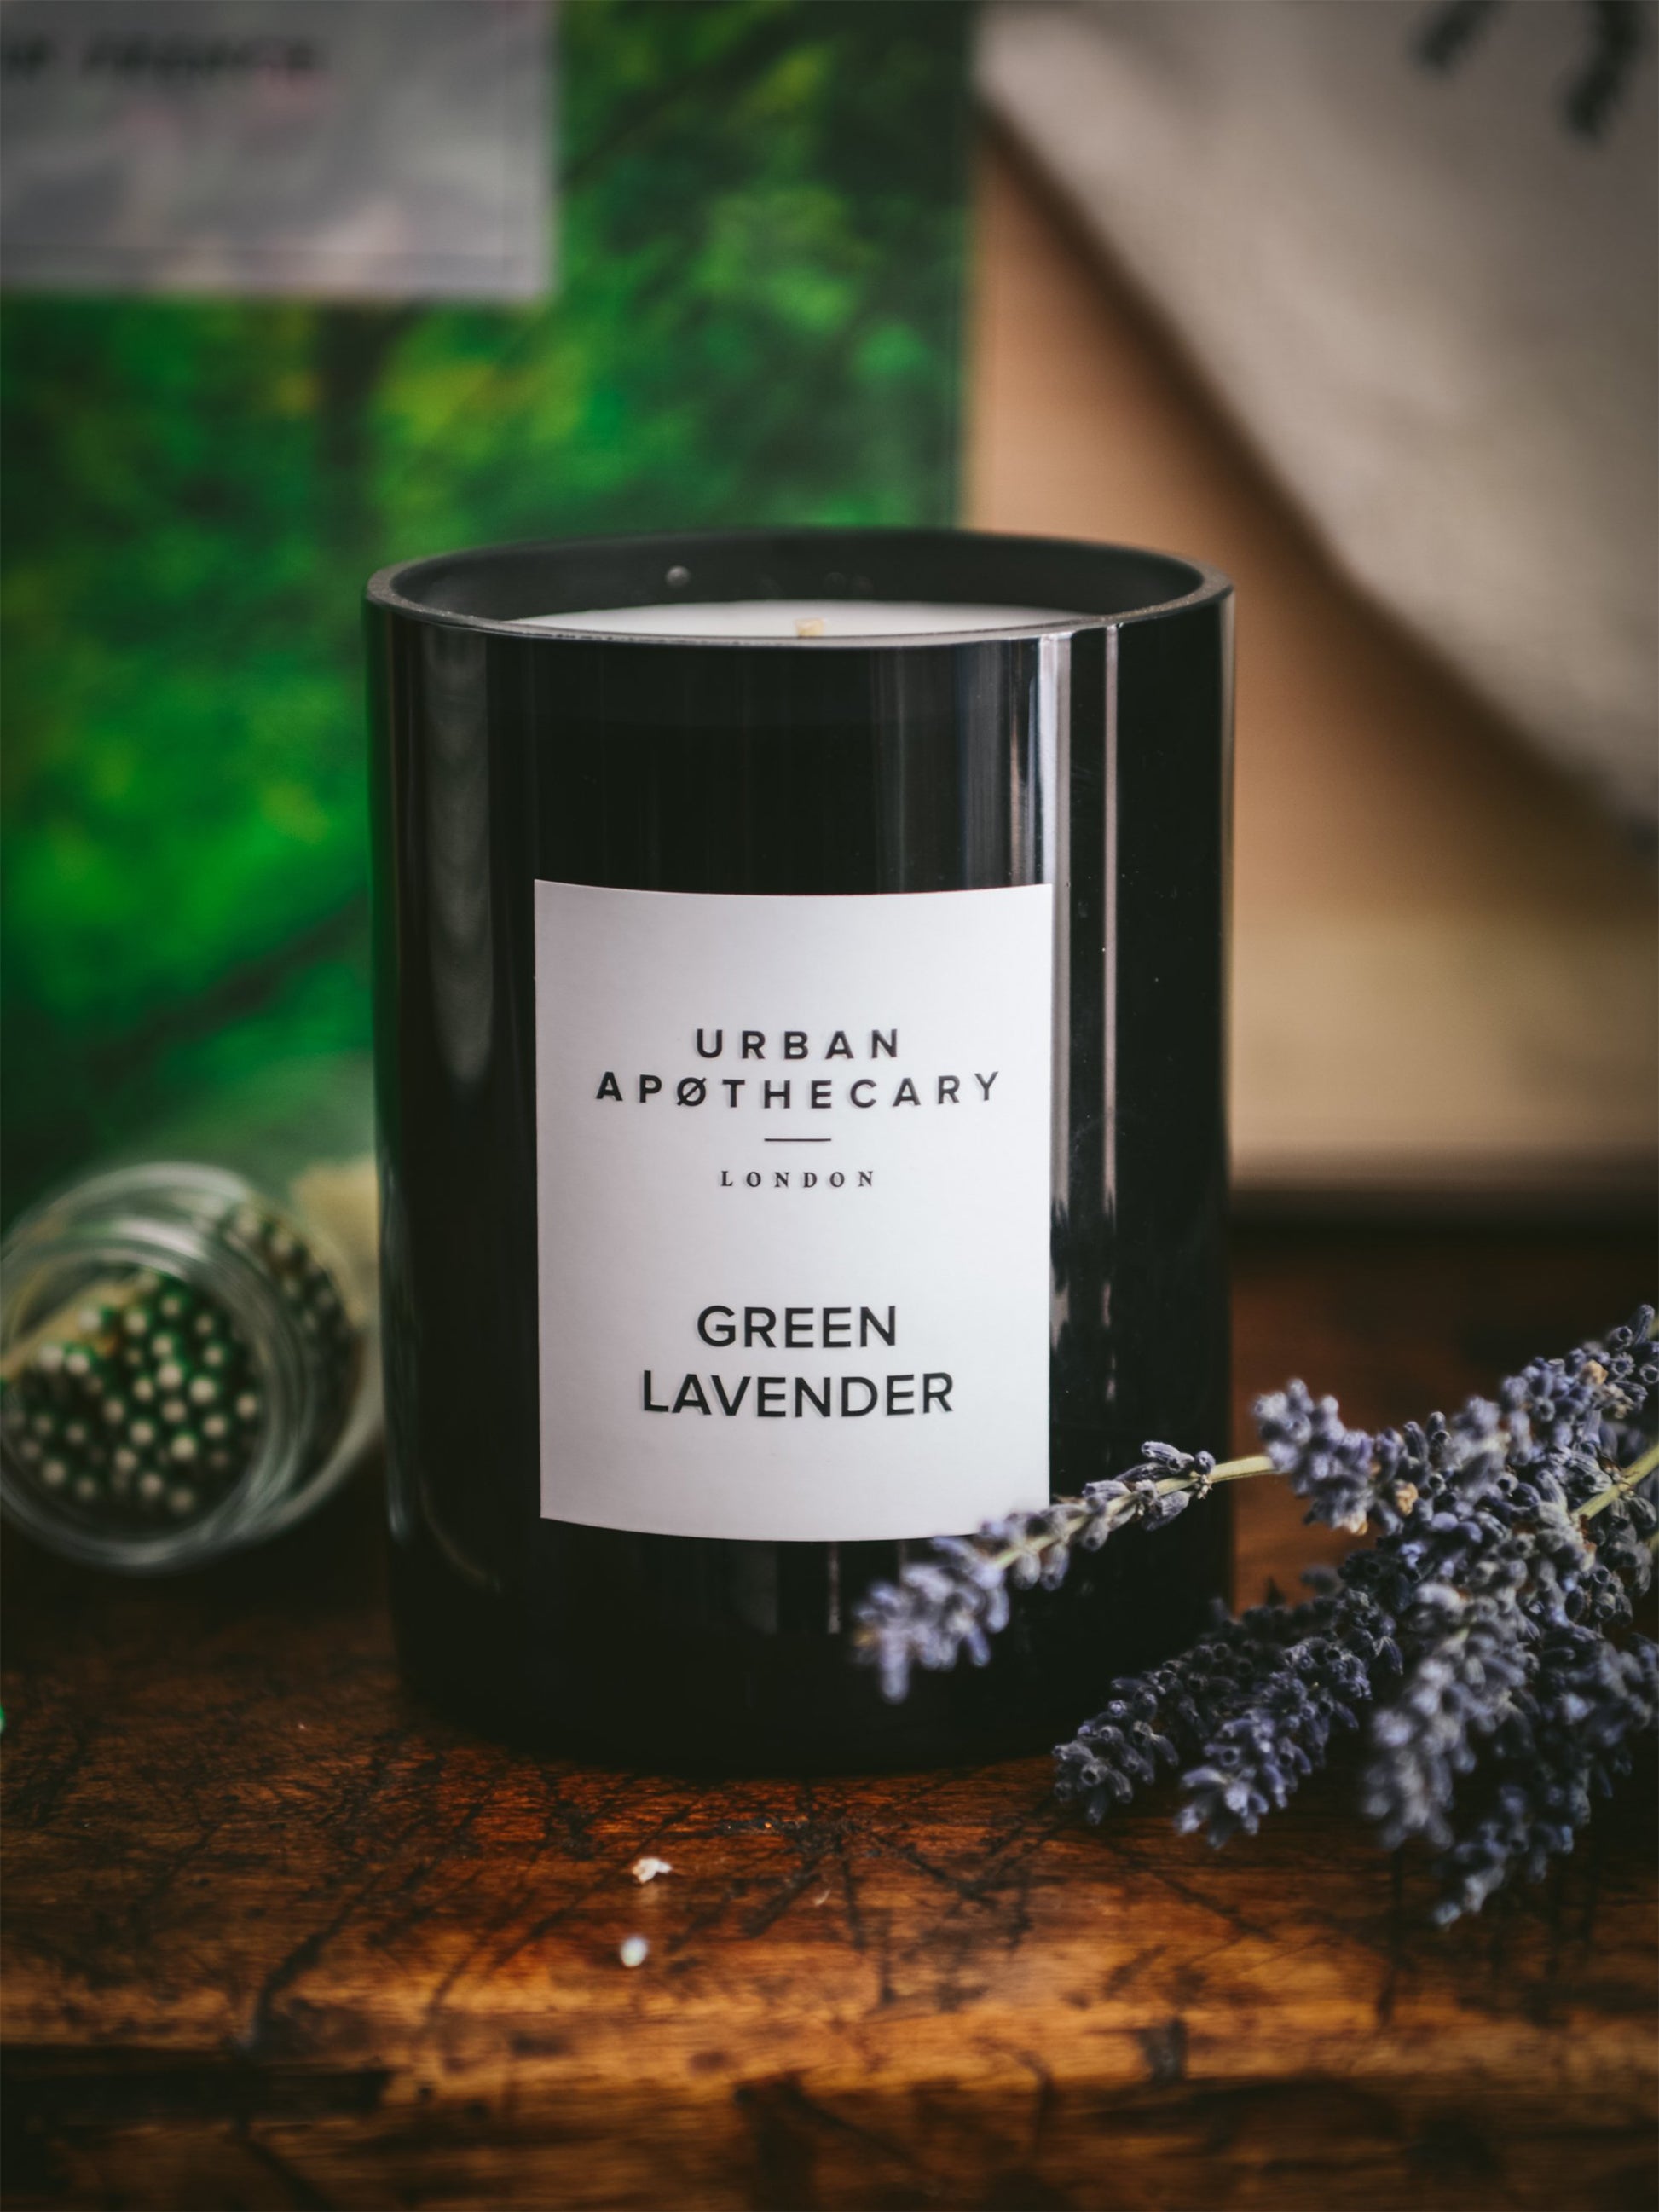 Urban Apothecary London Luxury Green Lavender Scented Candle Weston Table